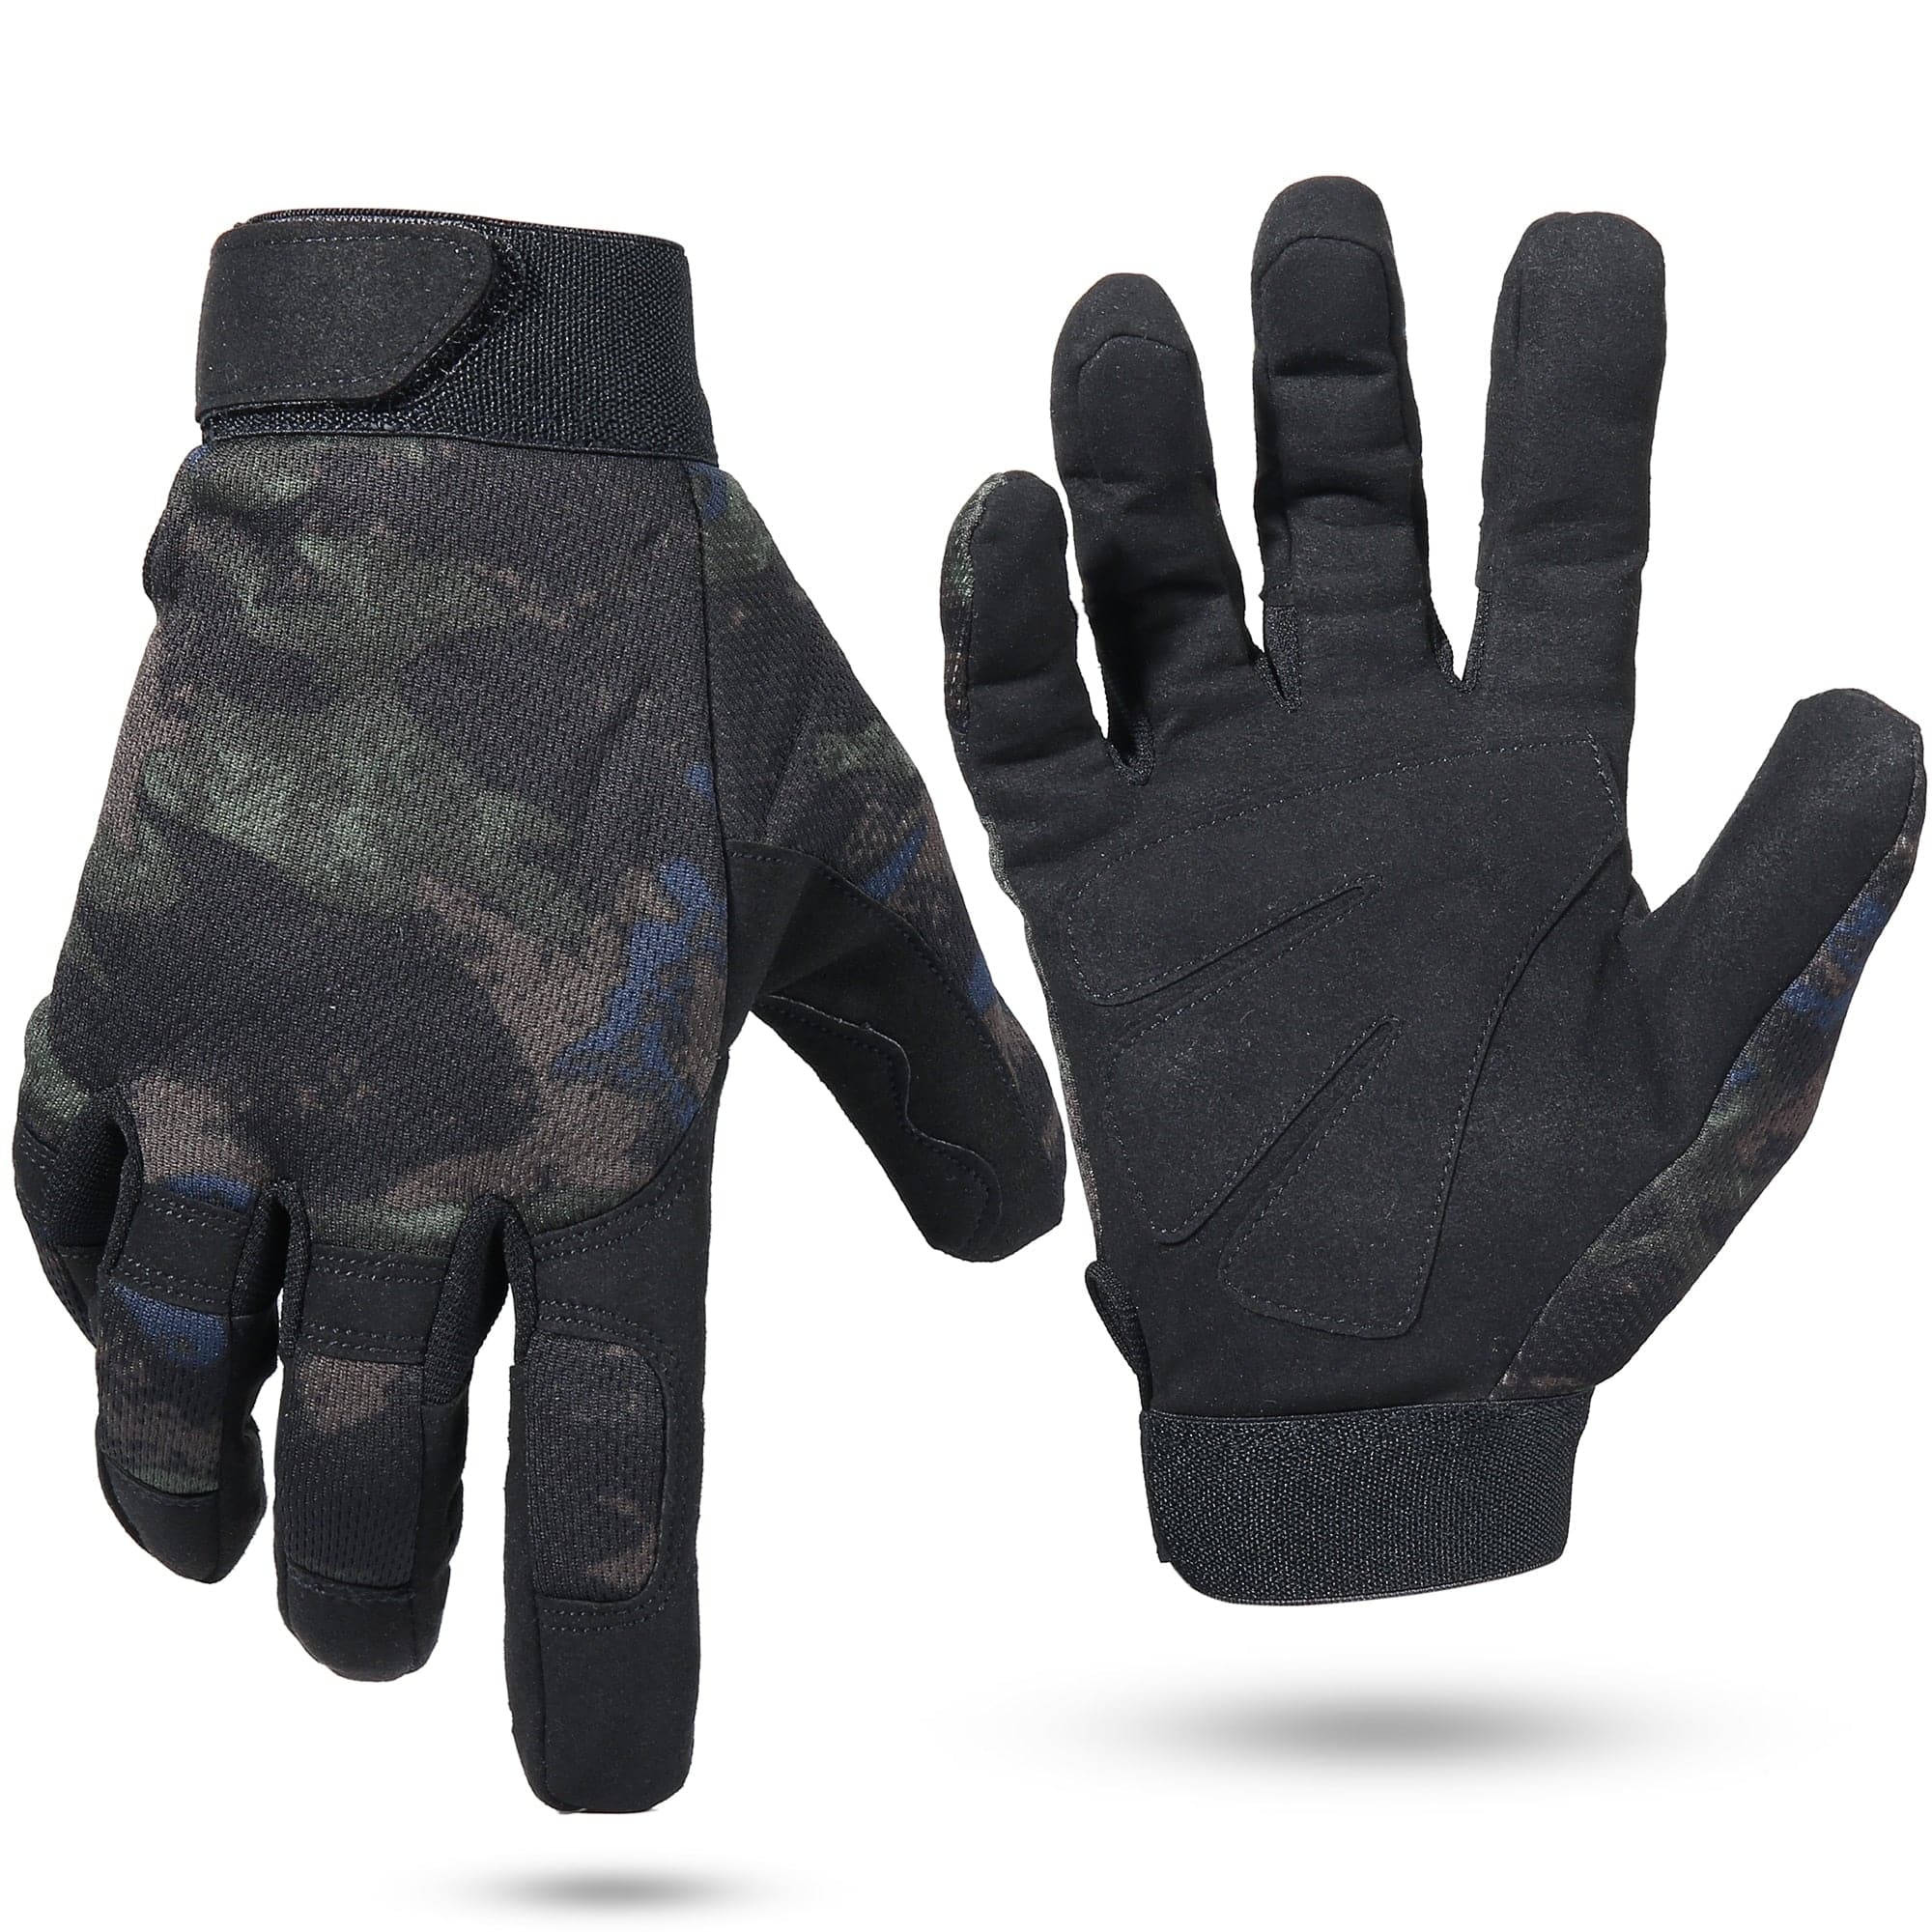 http://www.antarcticaoutdoors.com/cdn/shop/products/Multicam-Tactical-Gloves-Antiskid-Army-Military-Bicycle-Airsoft-Motorcycle-Shoot-Paintball-Work-Gear-Camo-Full-Finger_b045c7d3-1656-4723-9e6b-2ba49a856d86.jpg?v=1656579942